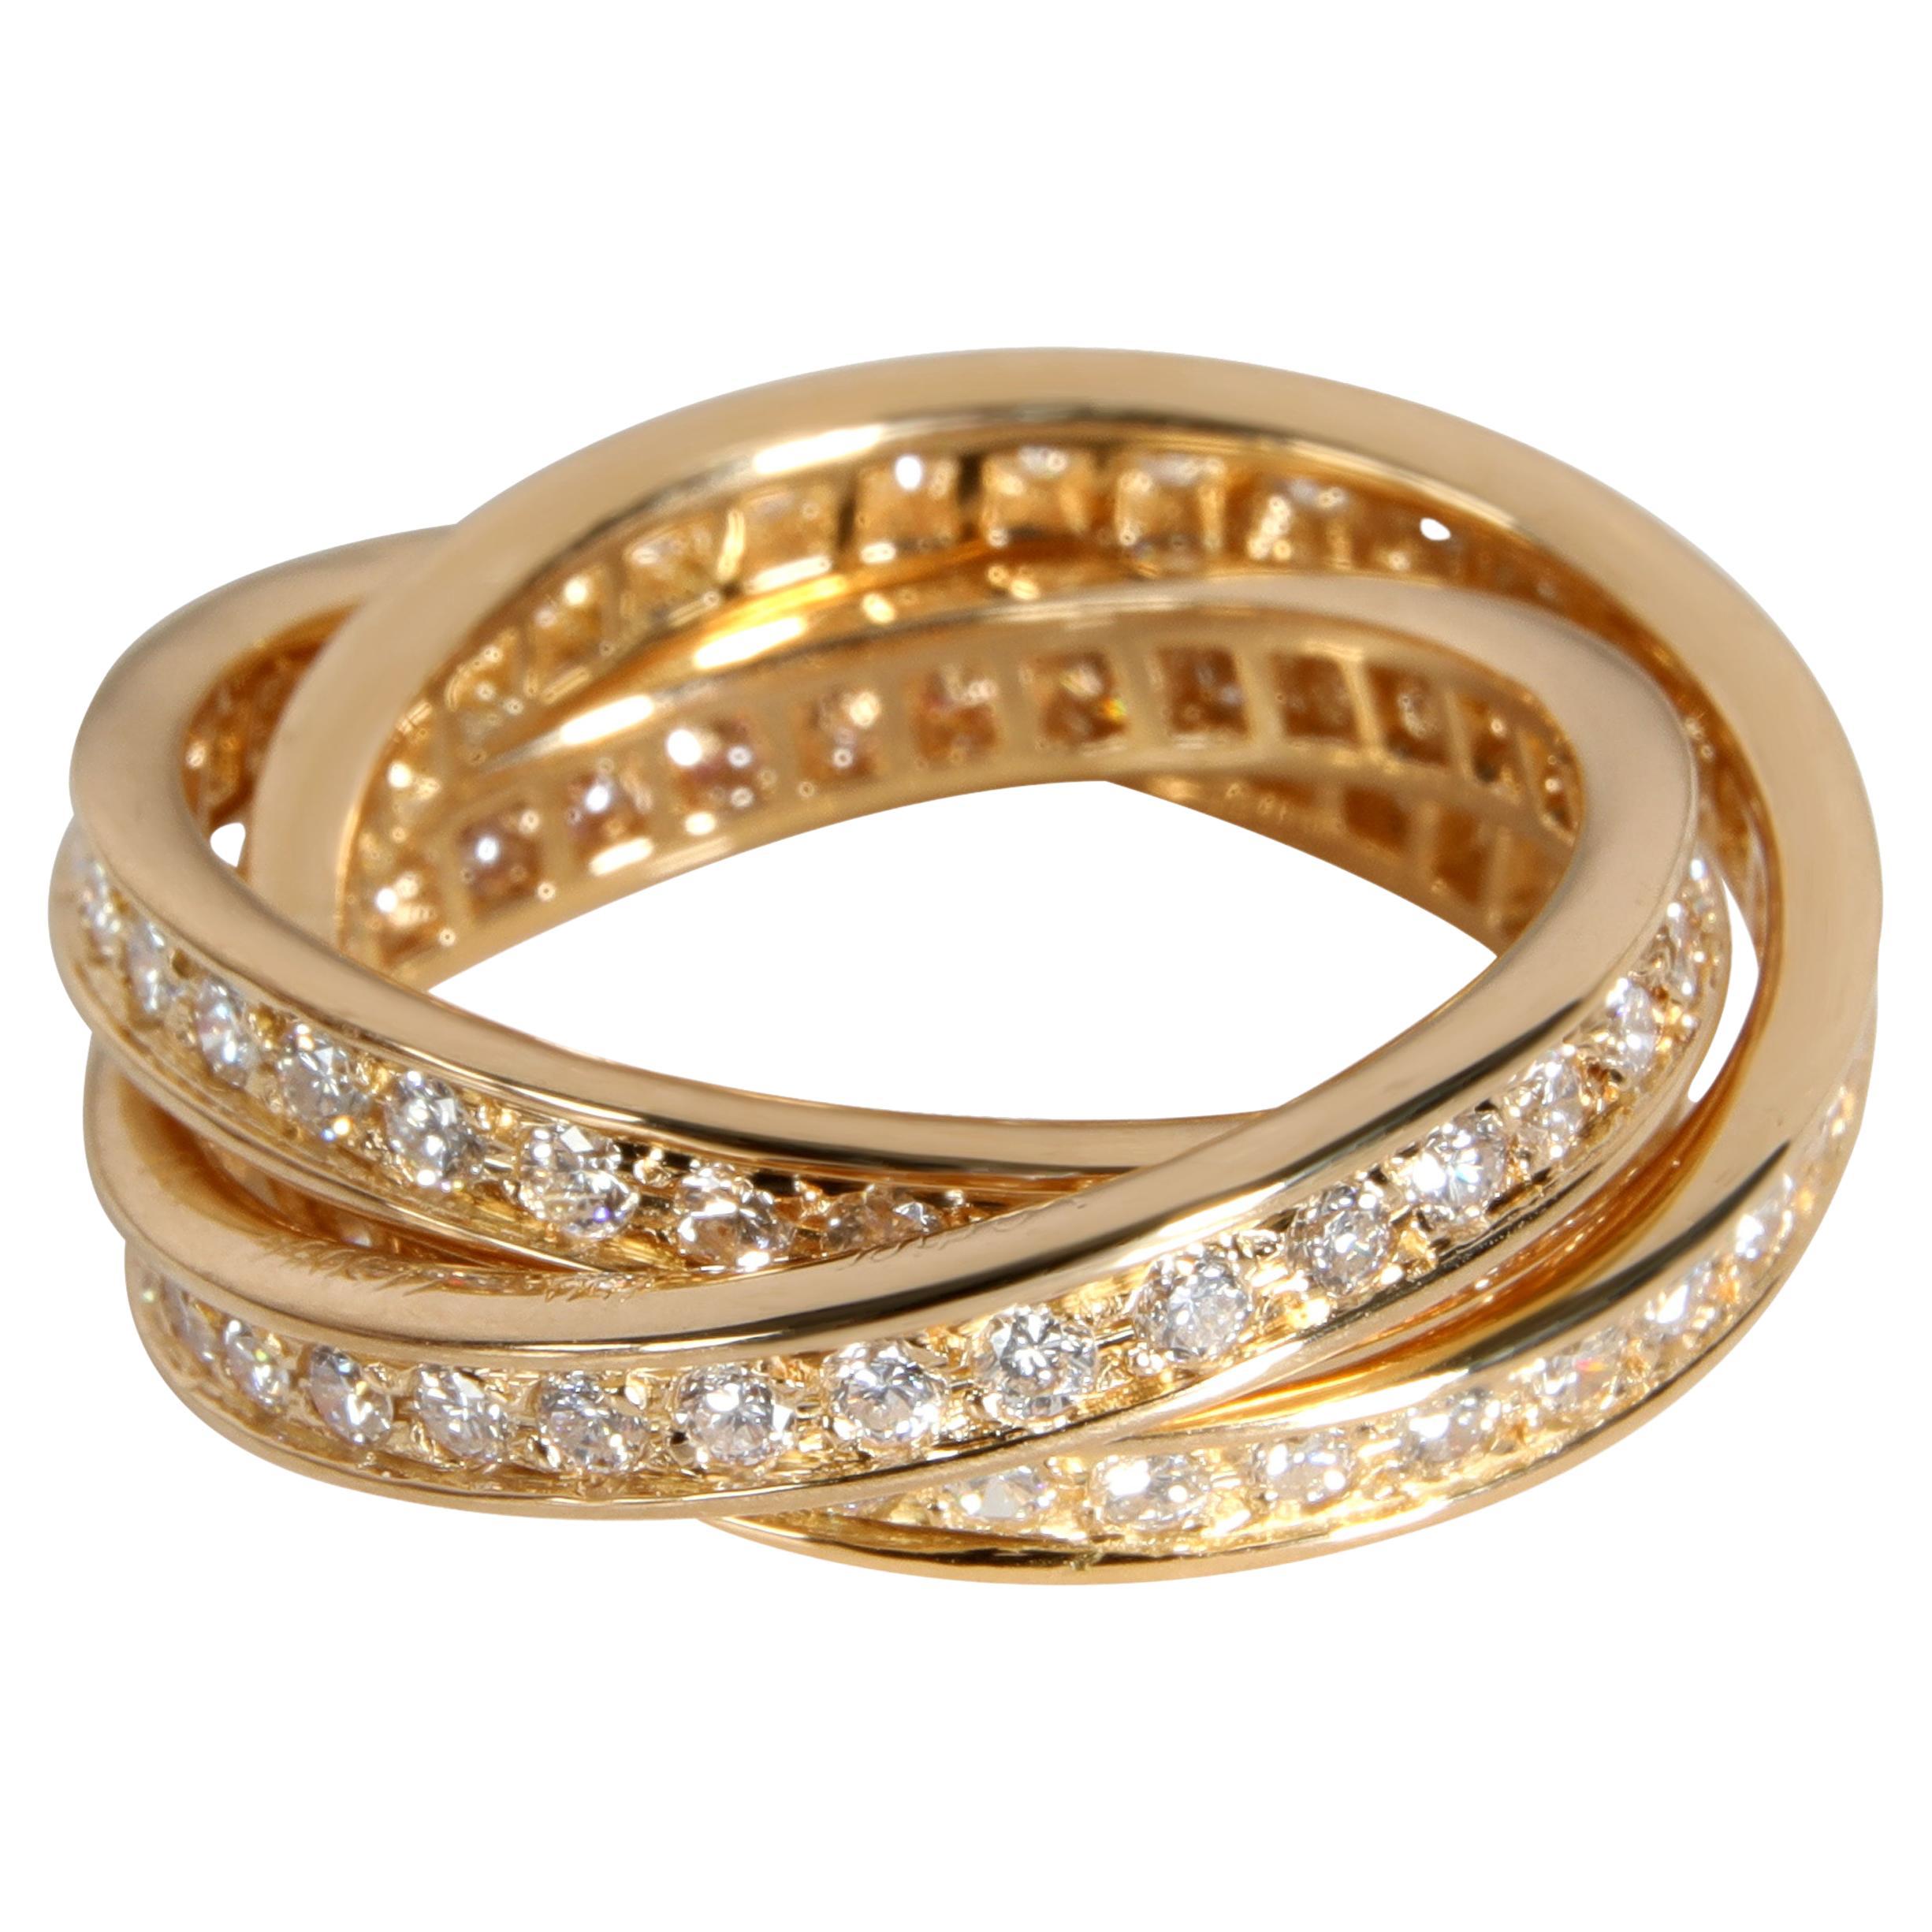 Cartier Trinity Diamond Ring in 18K Yellow Gold 1.5 CTW For Sale